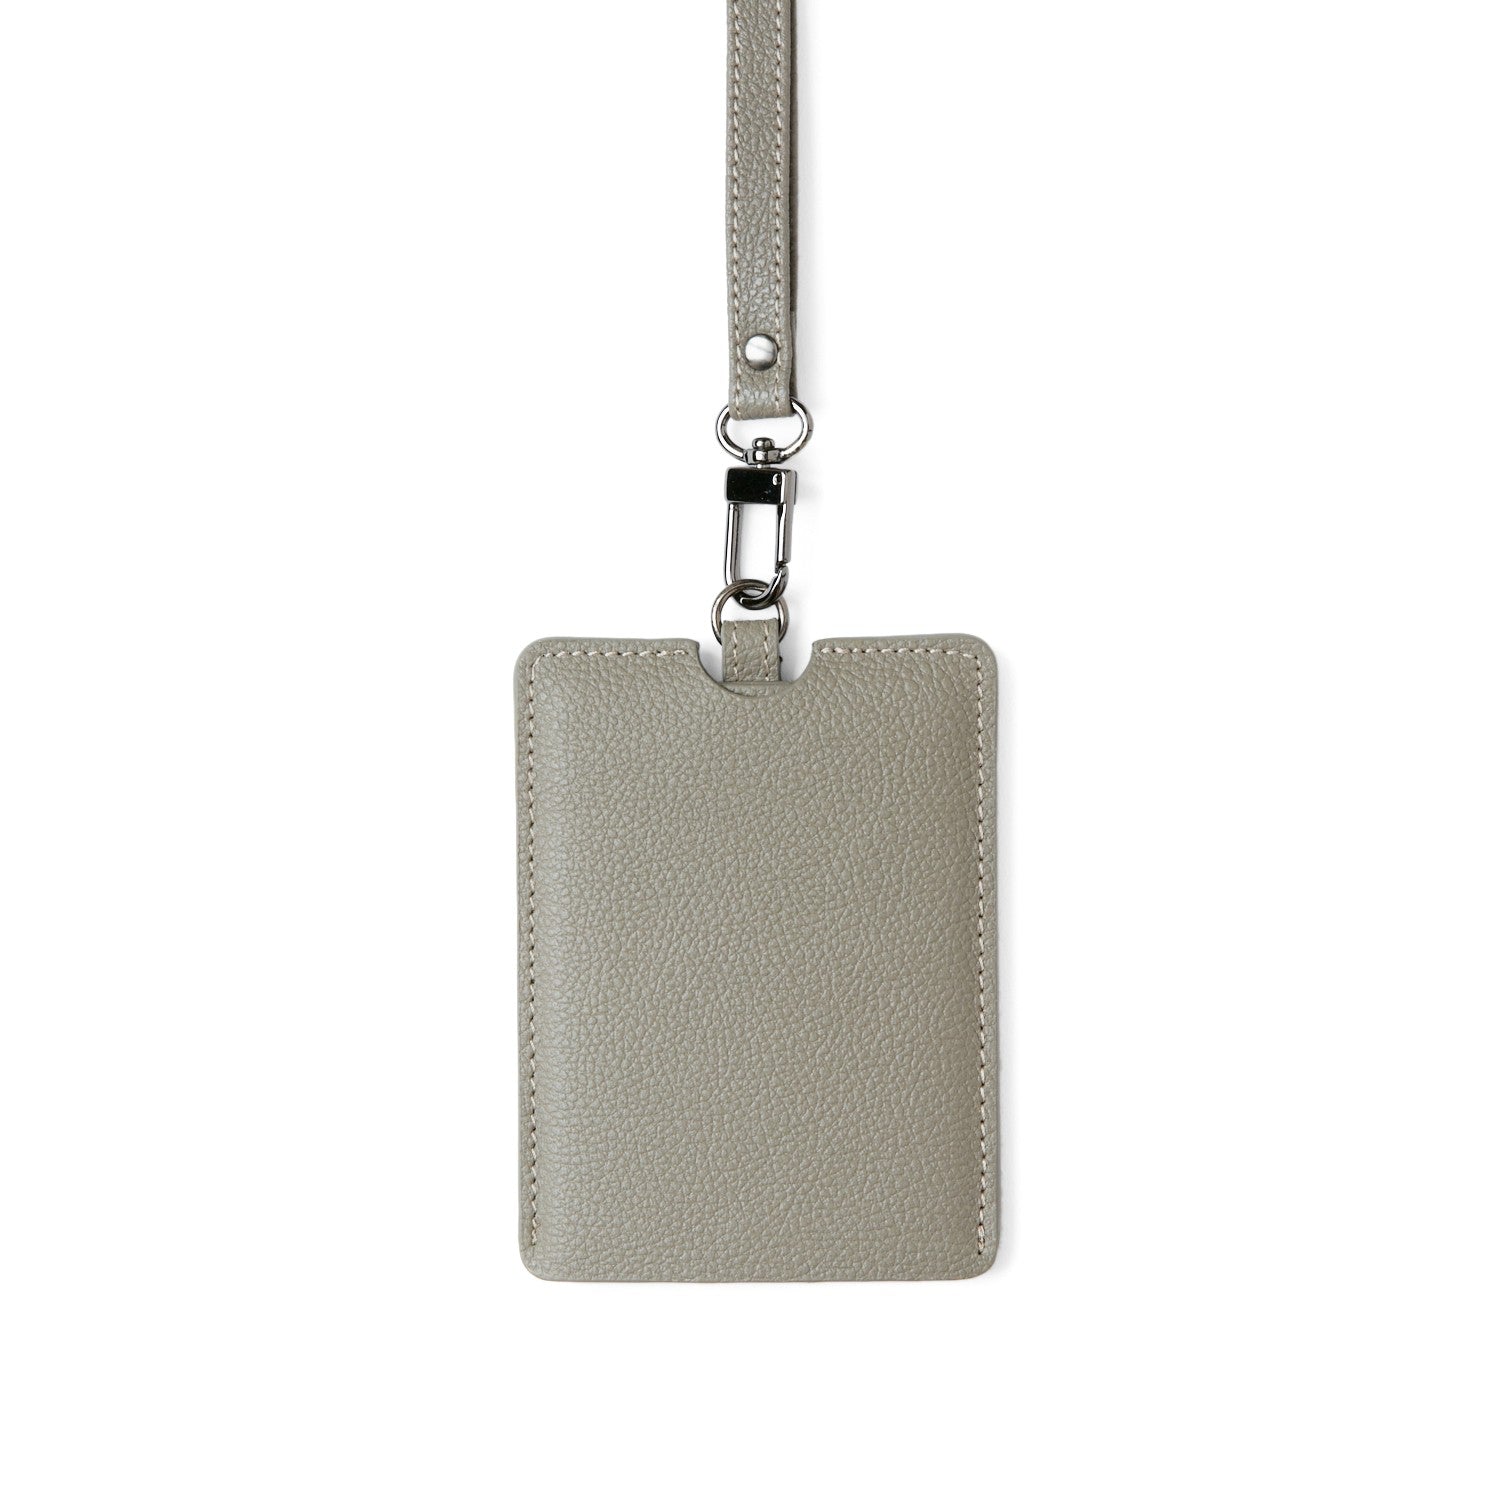 Access Card Holder with Lanyard